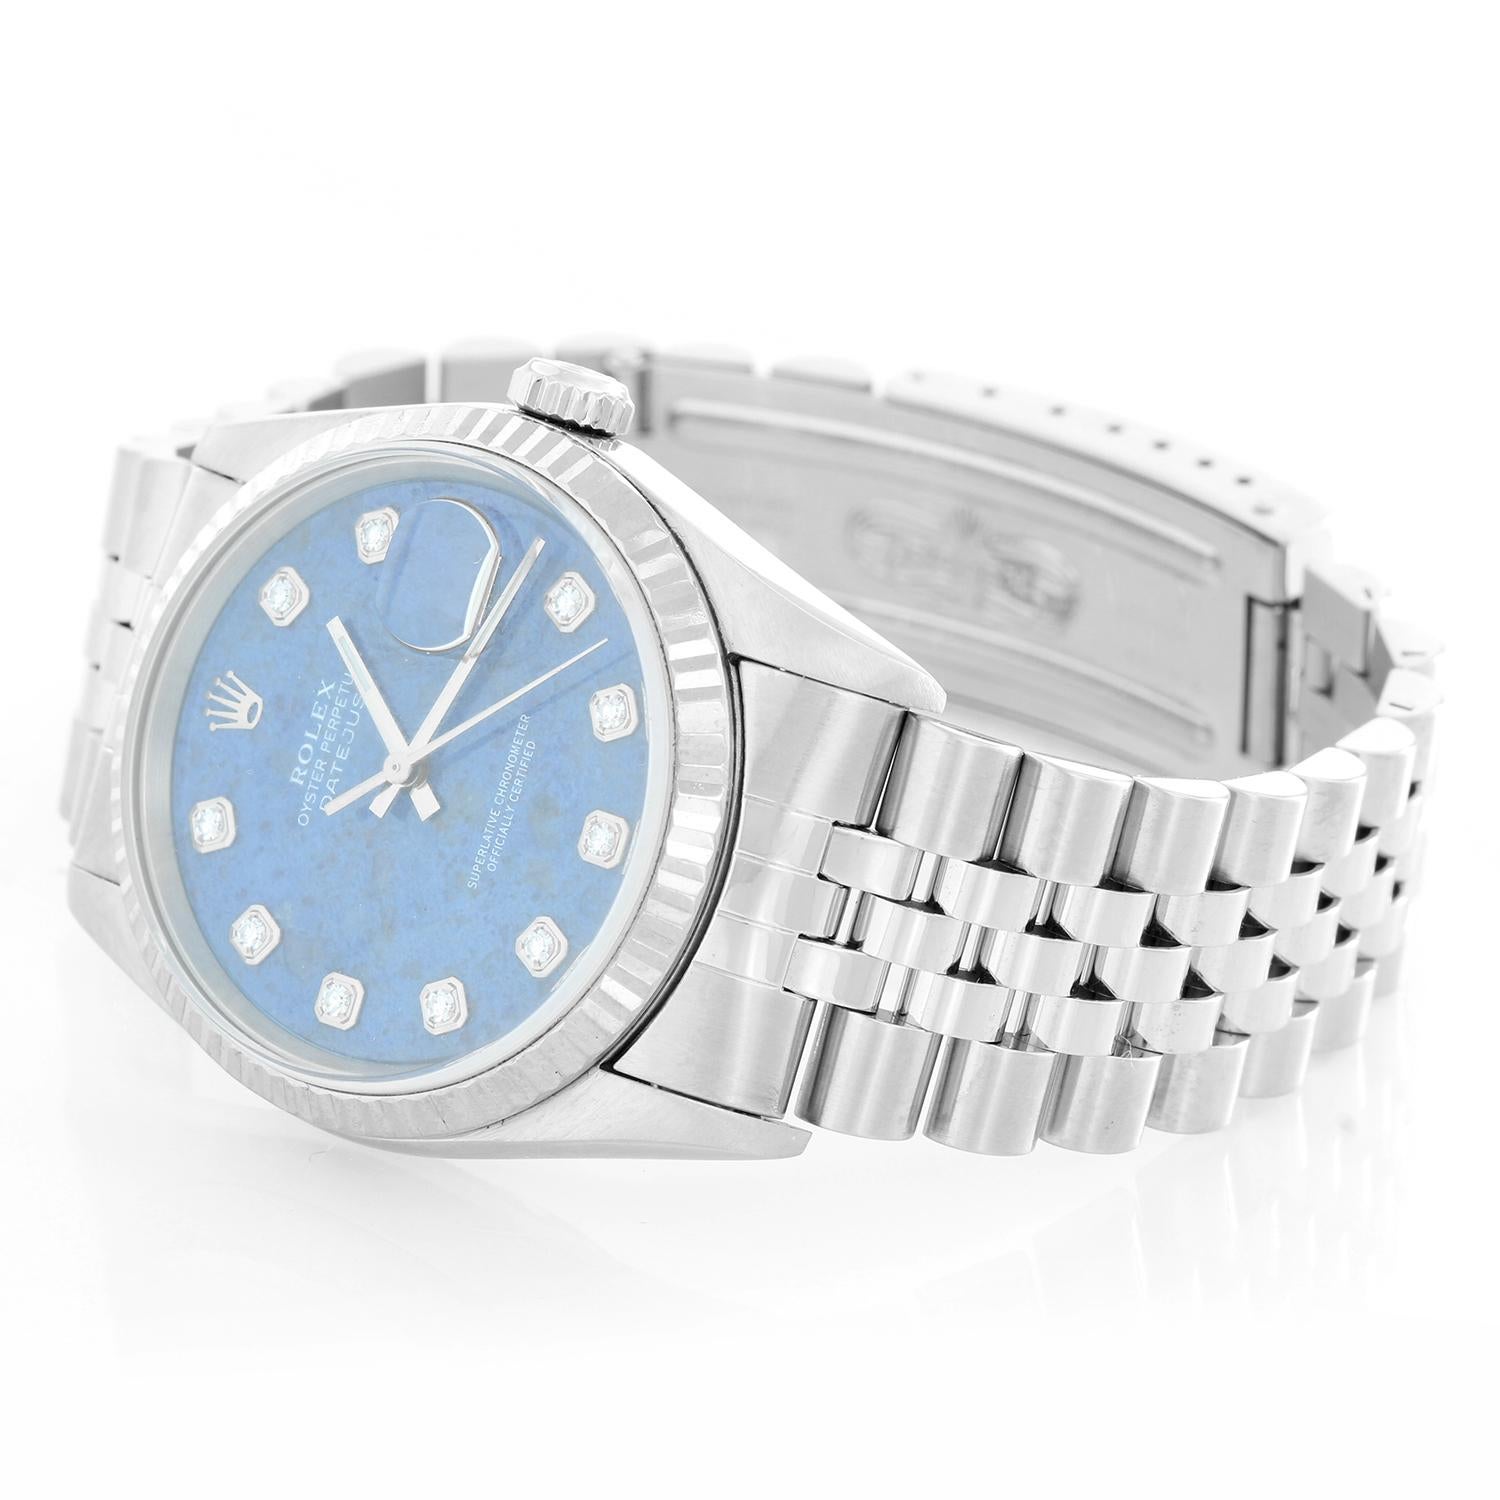 Rolex Datejust Men's Stainless Steel Watch 16234 - Automatic winding, 31 jewels, Quickset, sapphire crystal. Stainless steel case with 18k white gold fluted bezel . Rolex Sodalite Diamond Dial . Stainless steel Jubilee bracelet. Pre-owned with